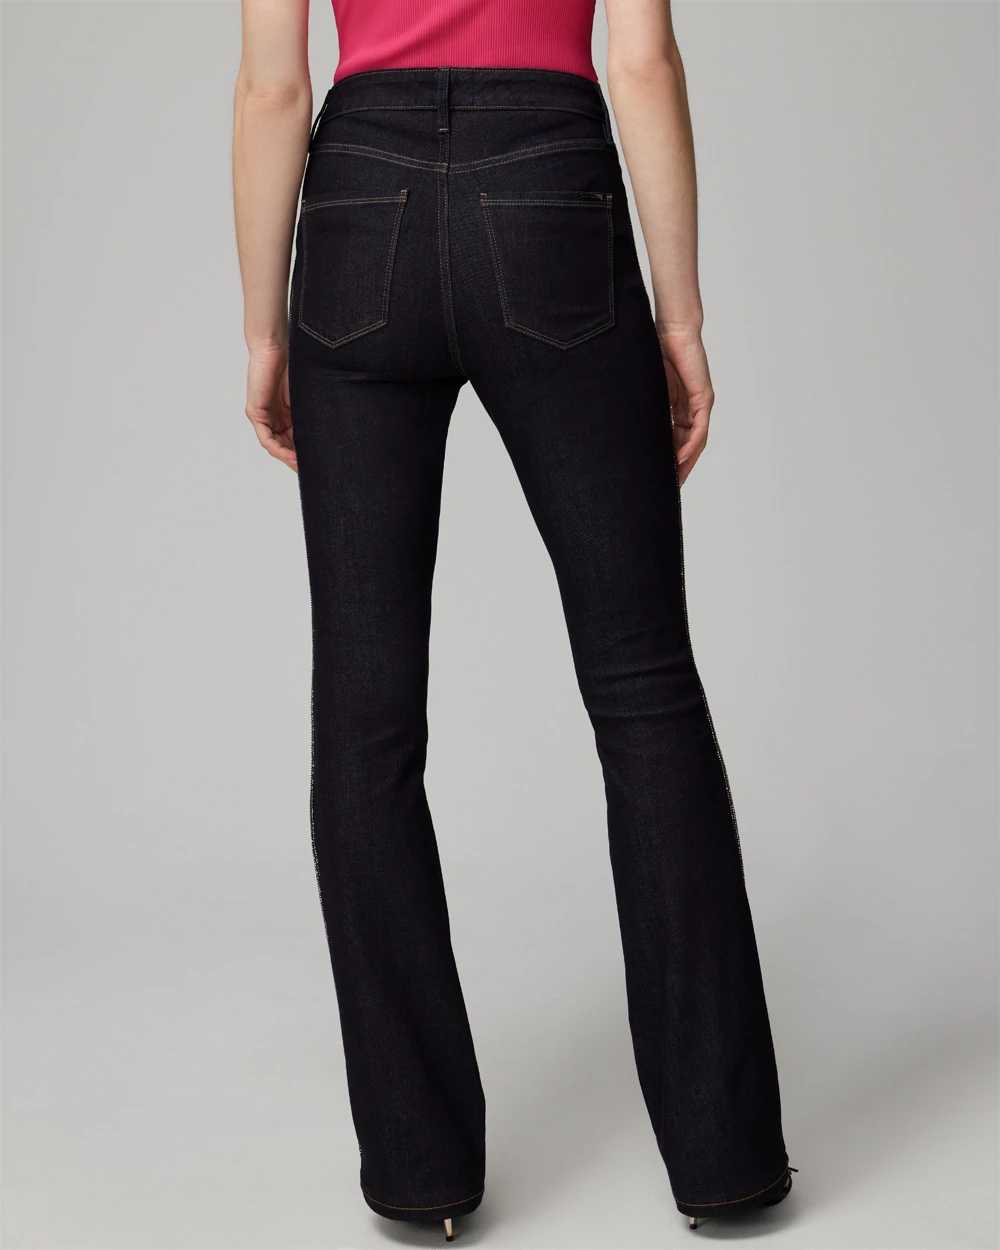 High Rise Sculpt Embellished Flare Jeans click to view larger image.